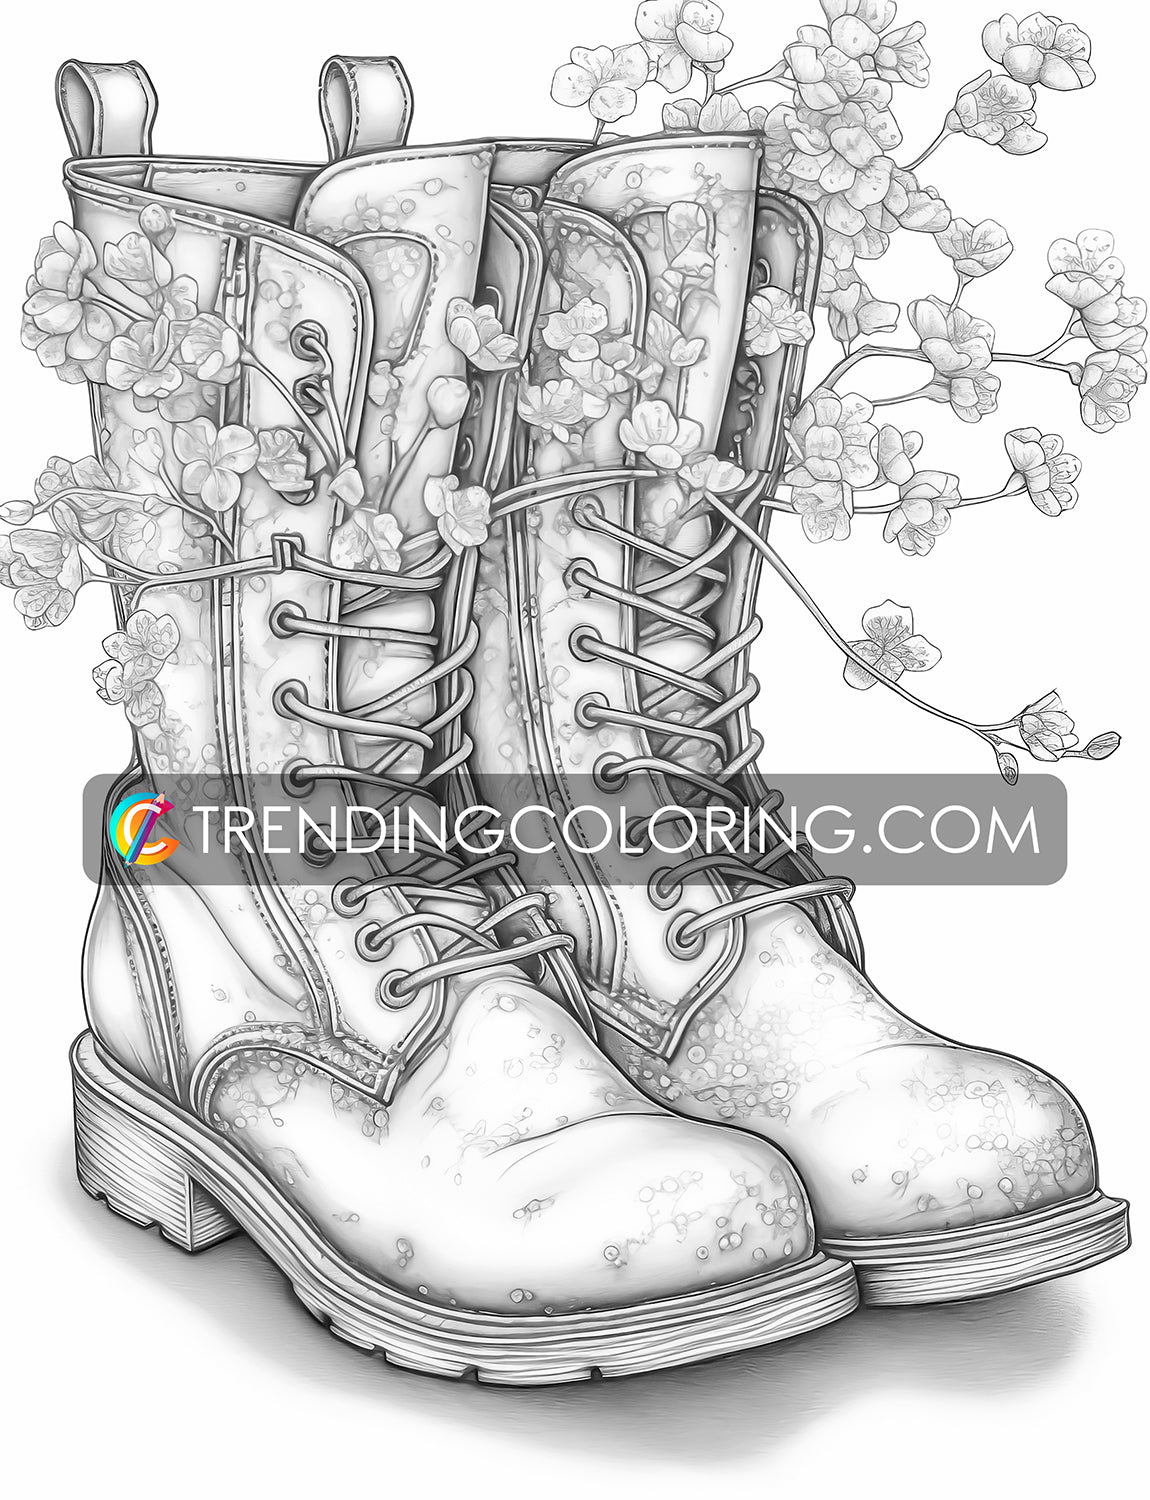 25 Blooming Boots Grayscale Coloring Pages - Instant Download - Printable PDF